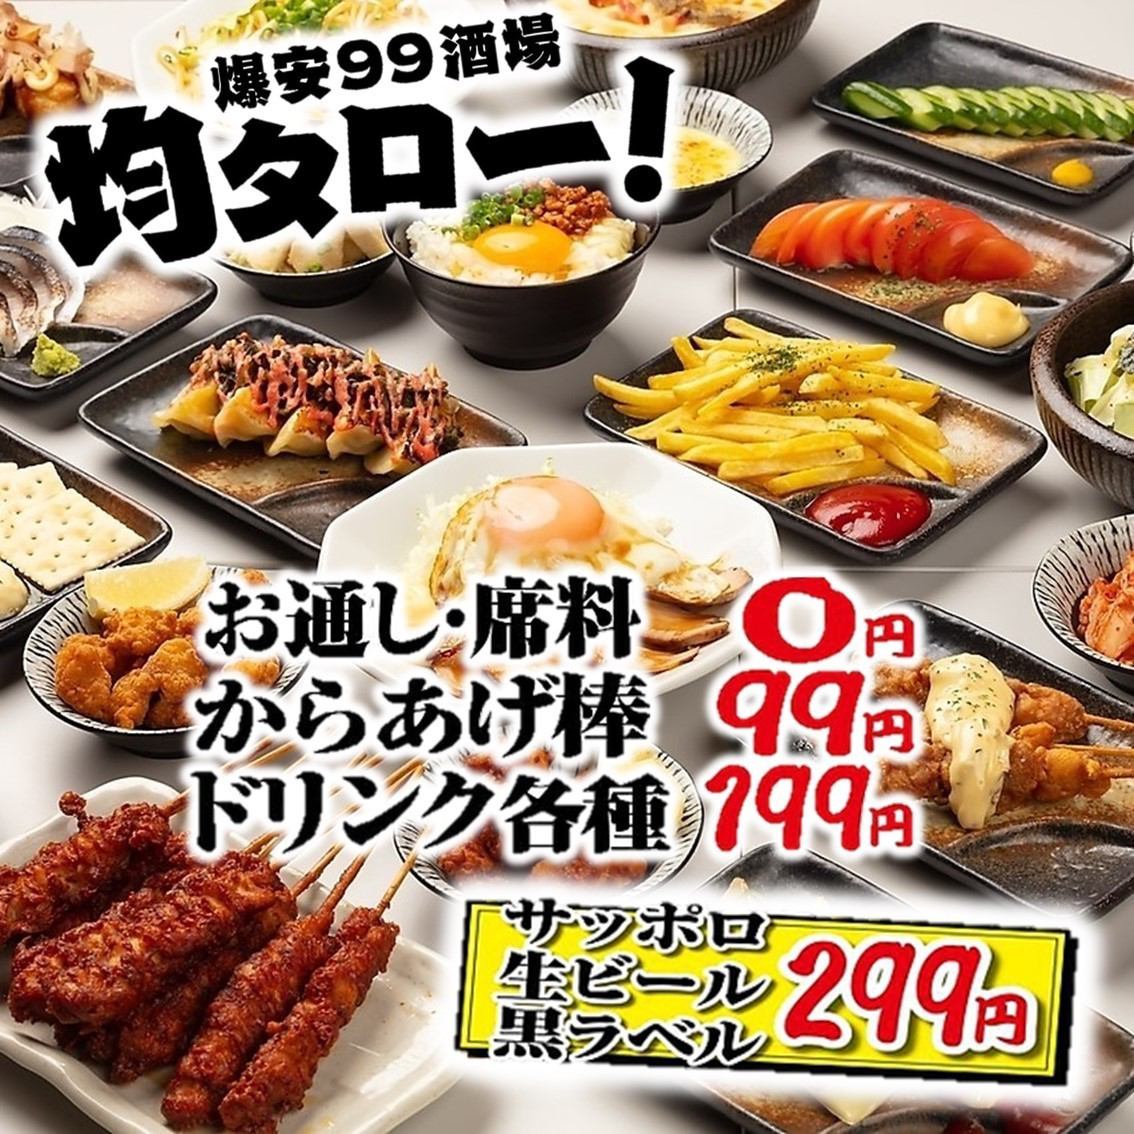 [Best in cost performance!] All-you-can-eat and 2-hour all-you-can-drink plan for 2,980 yen including tax☆